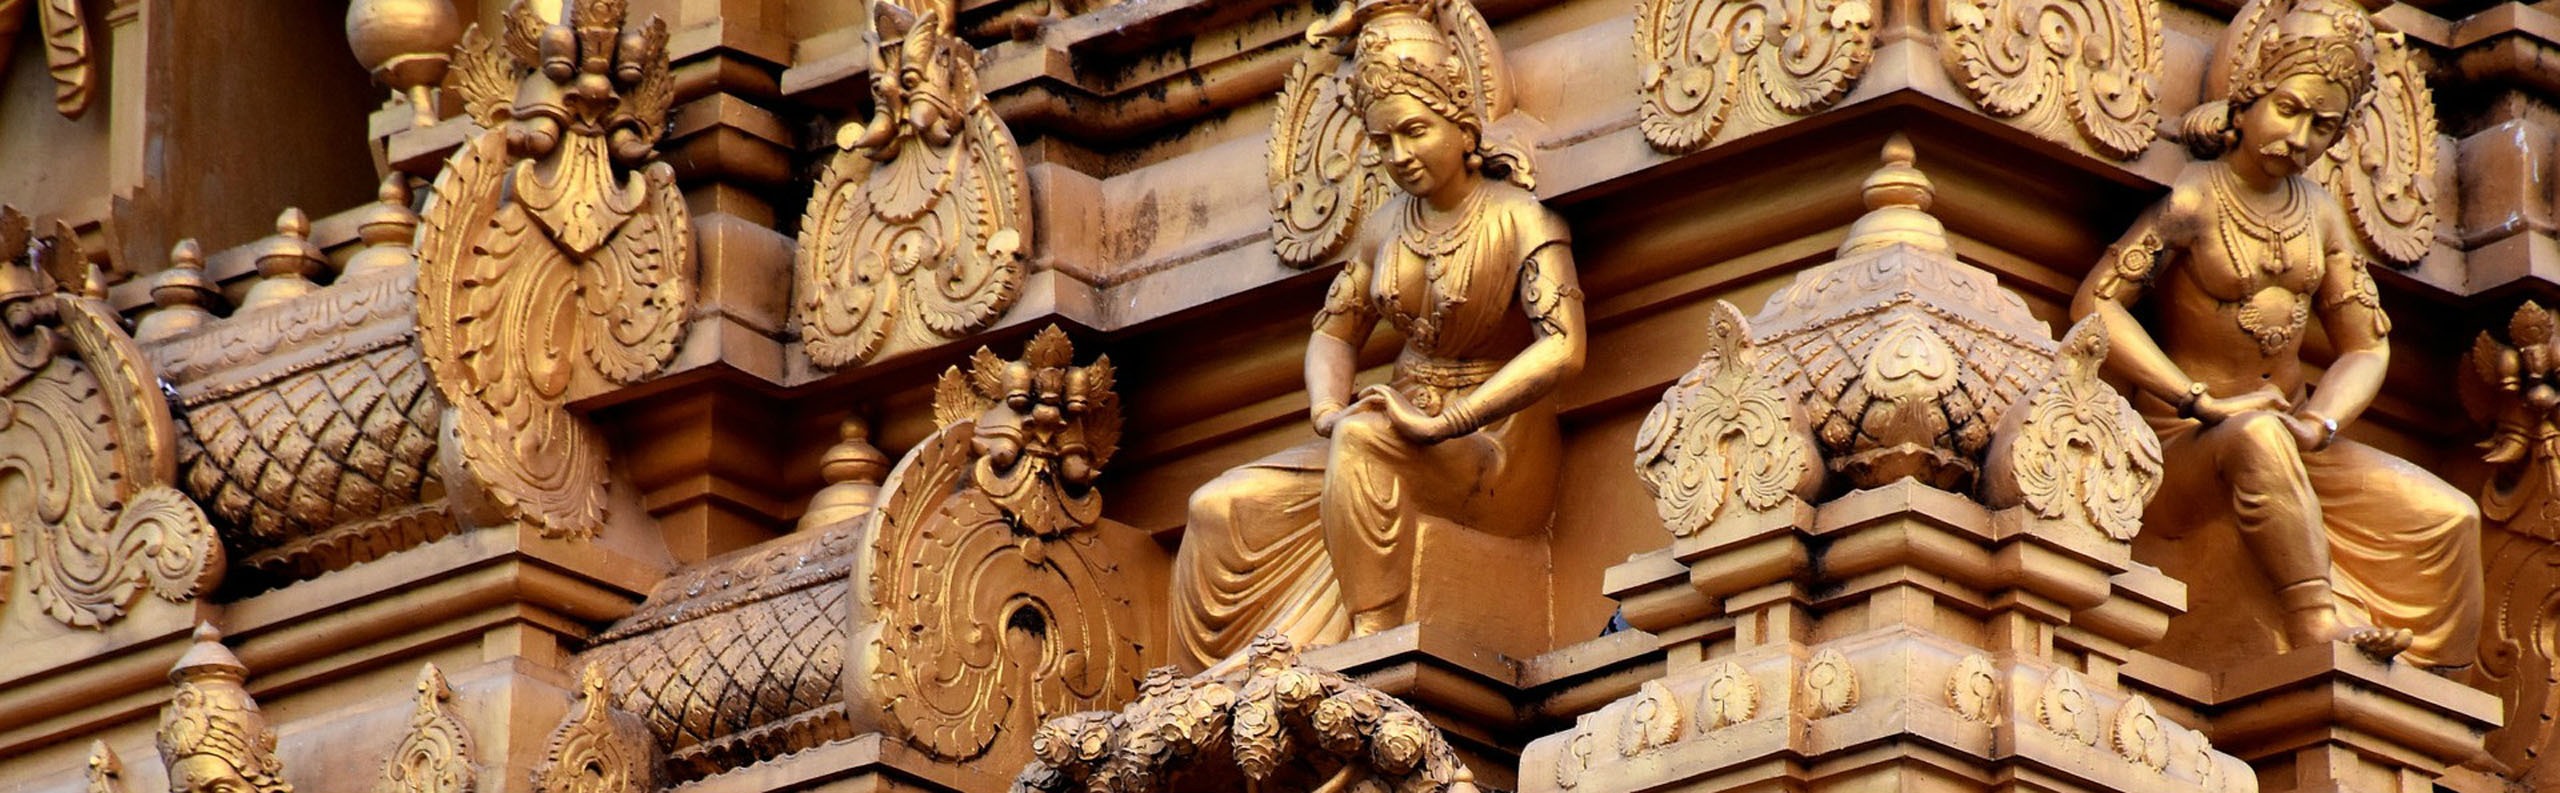 Top 10 Most Important Hindu Gods You Should Know